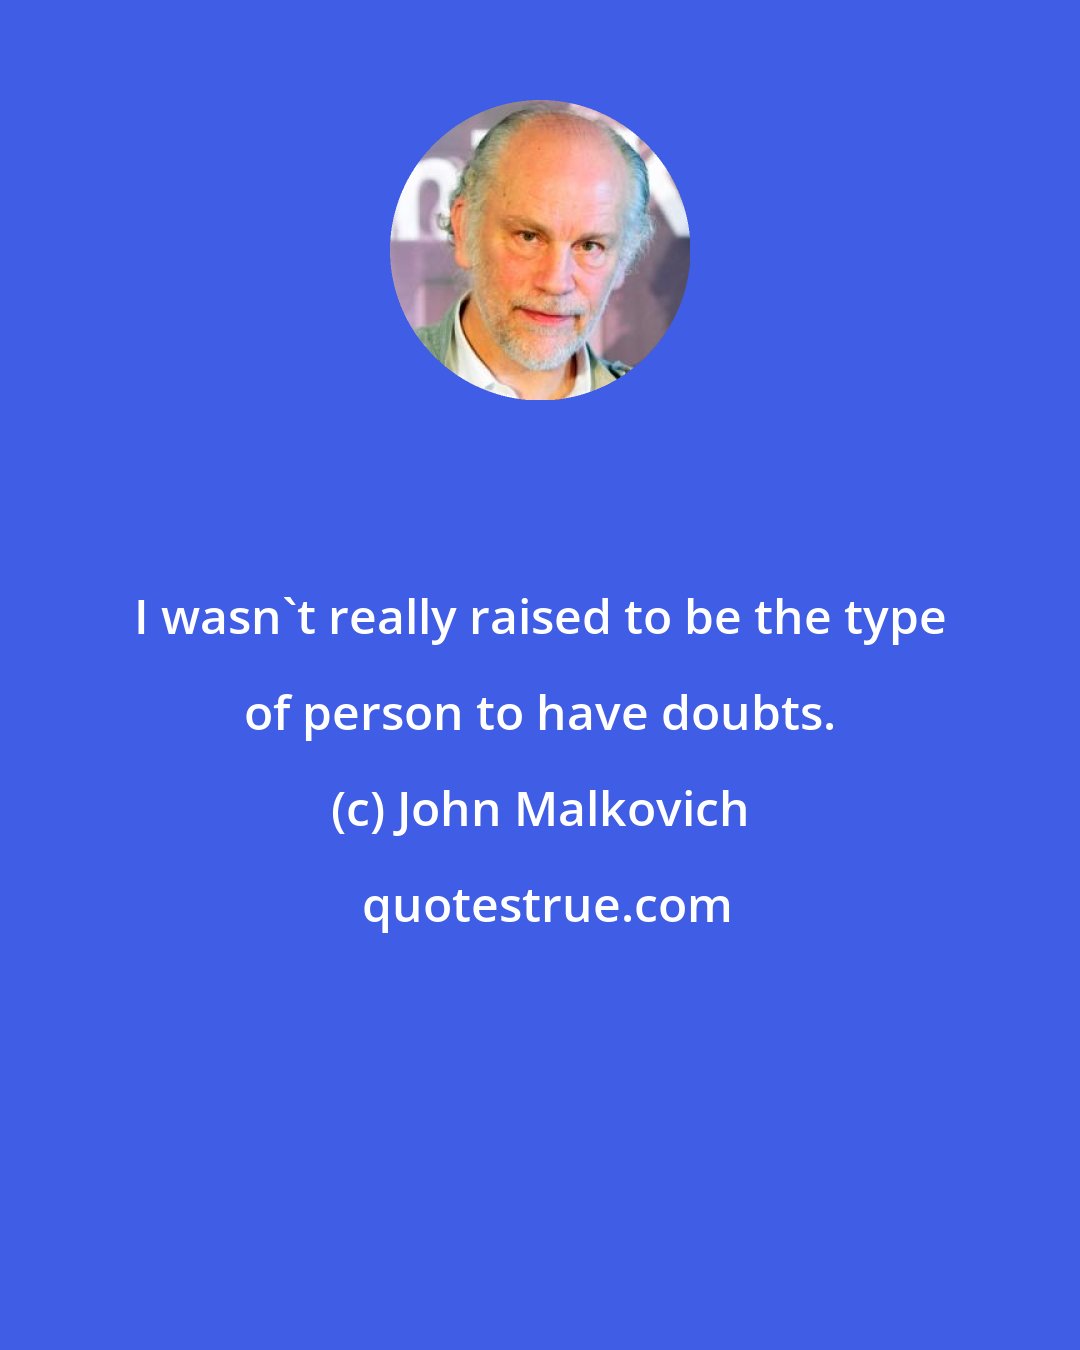 John Malkovich: I wasn`t really raised to be the type of person to have doubts.